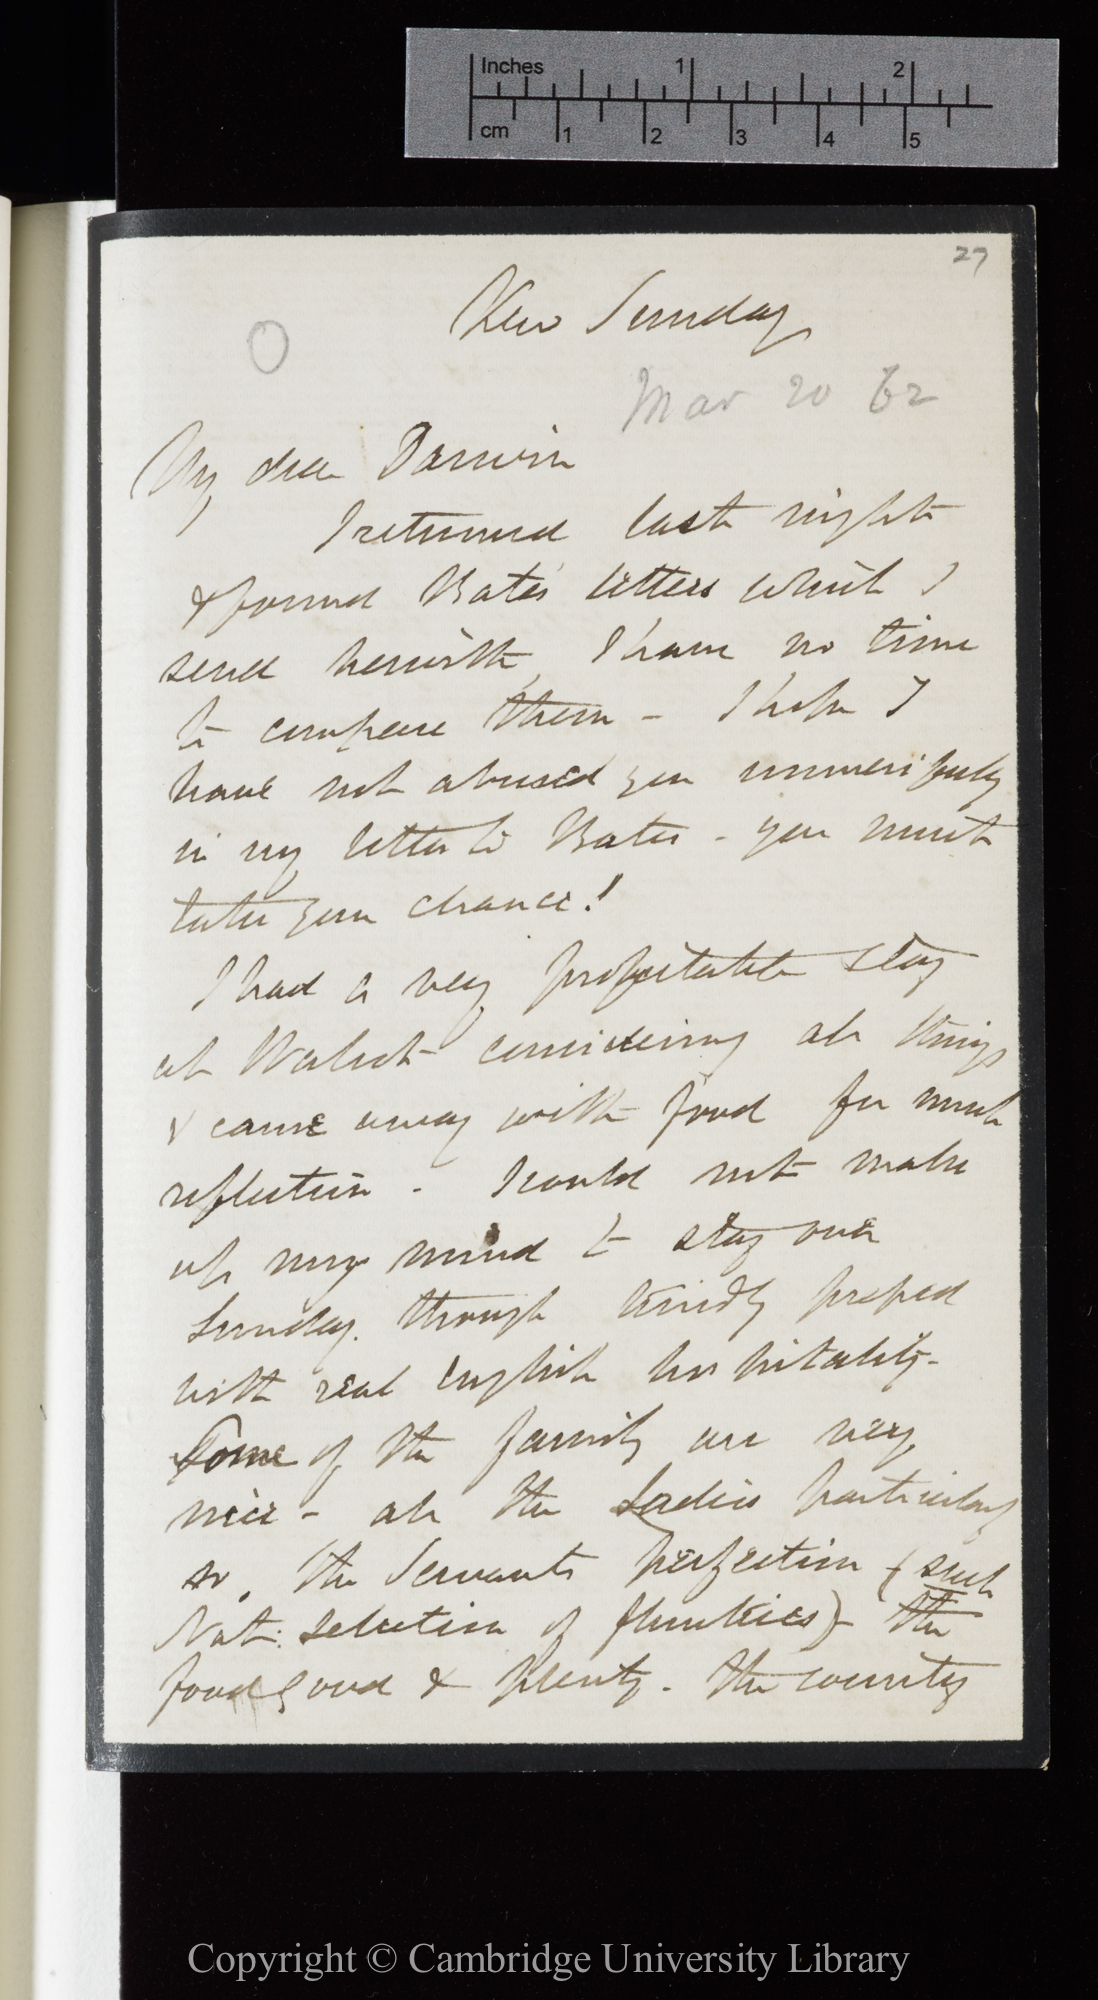 Letter from J. D. Hooker to C. R. Darwin   [23 March 1862]